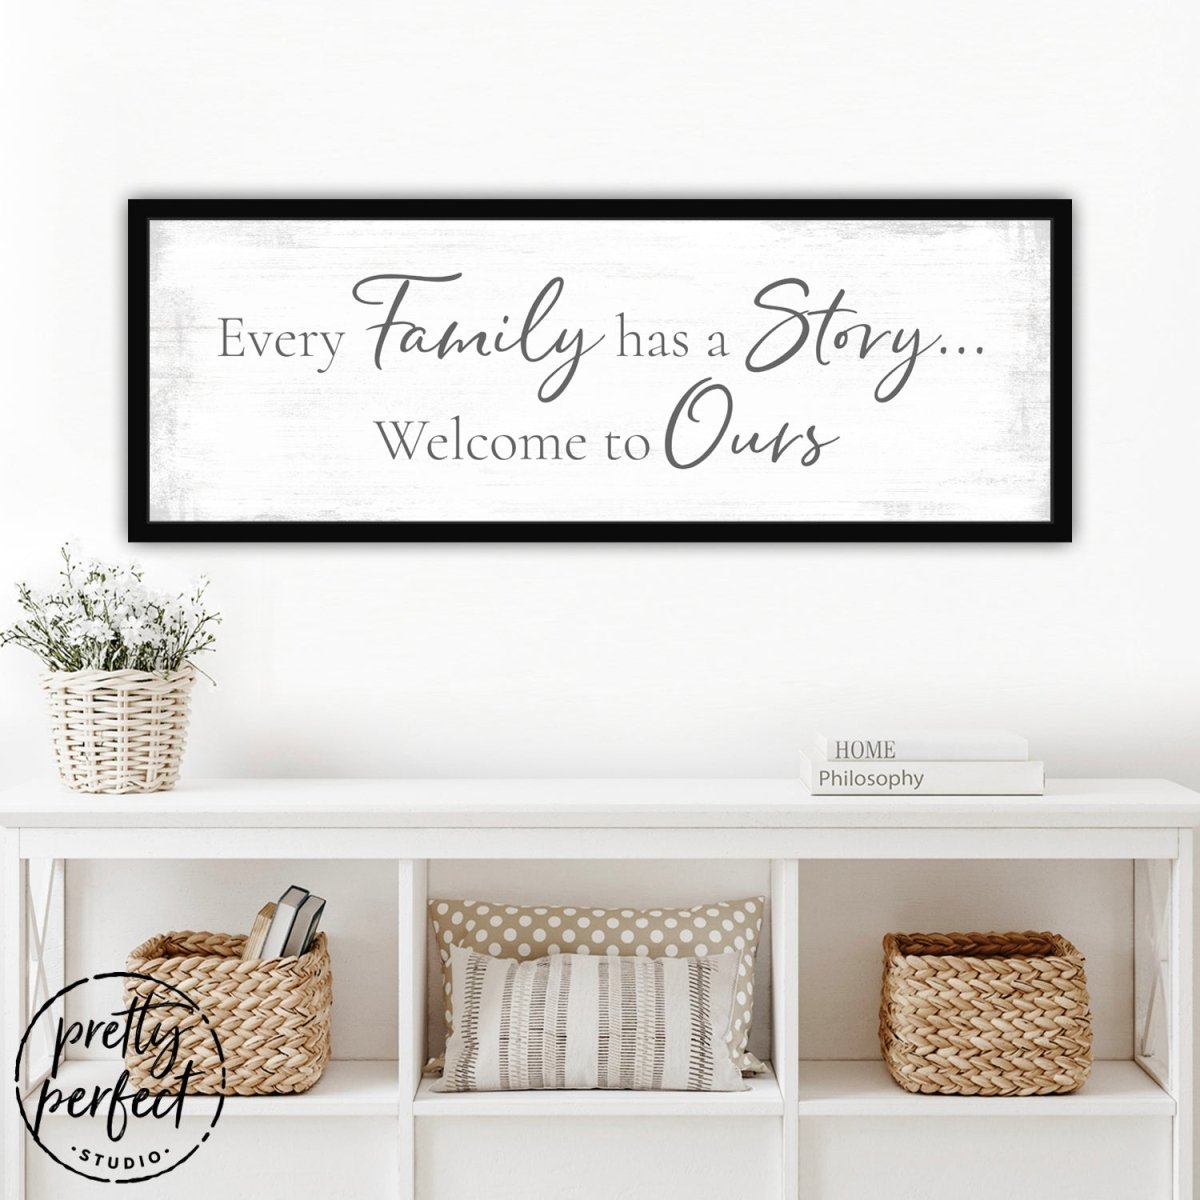 Every Family Has a Story Sign Above Entryway Shelf - Pretty Perfect Studio